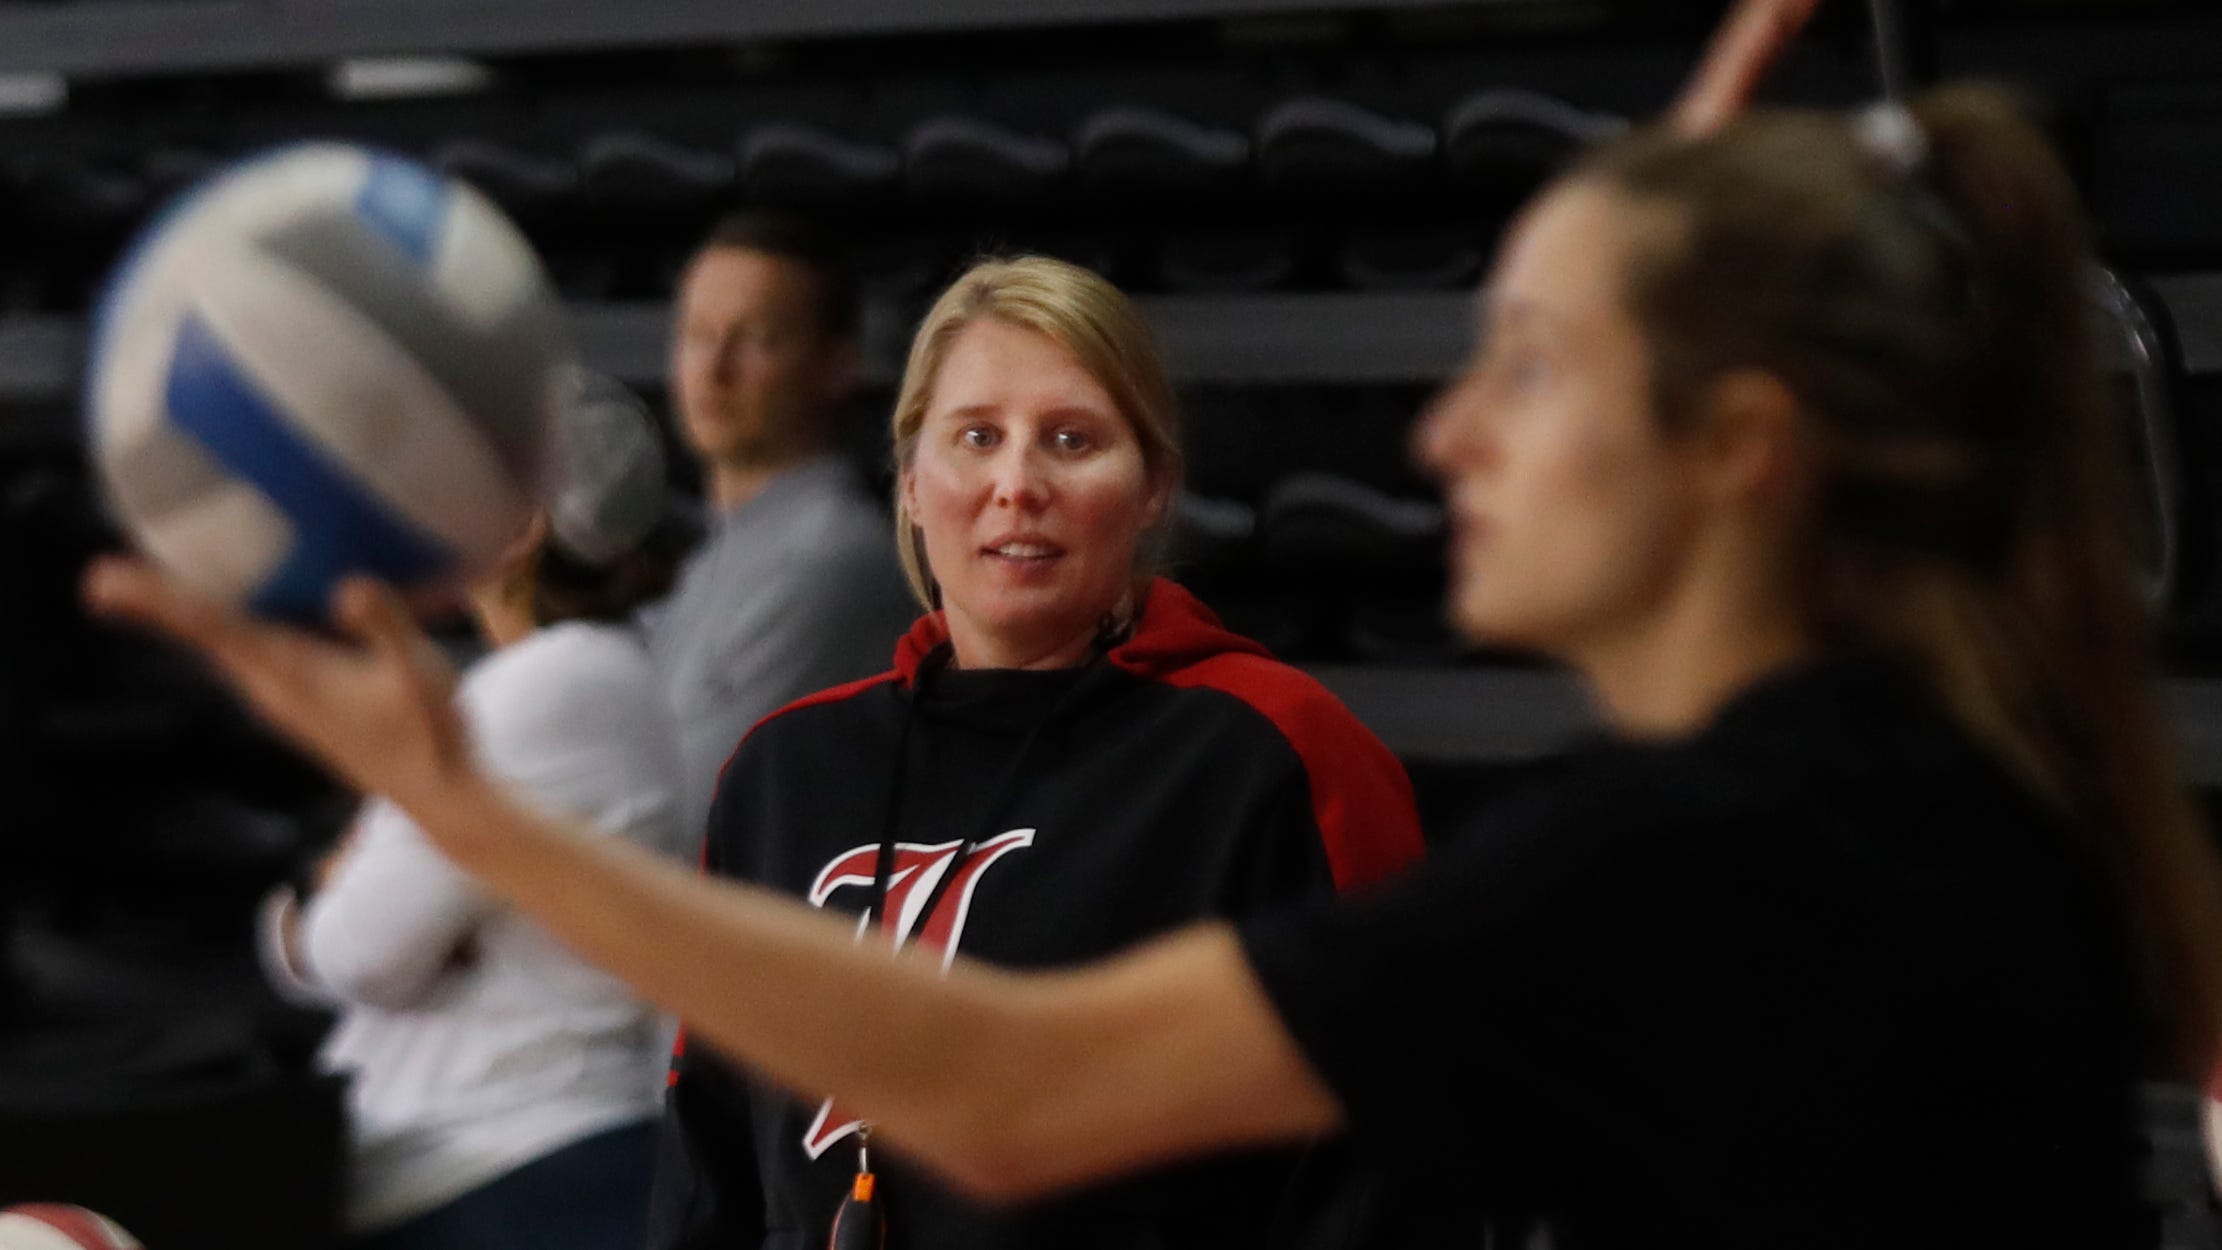 Louisville volleyball coach seeks to shatter NCAA glass ceiling